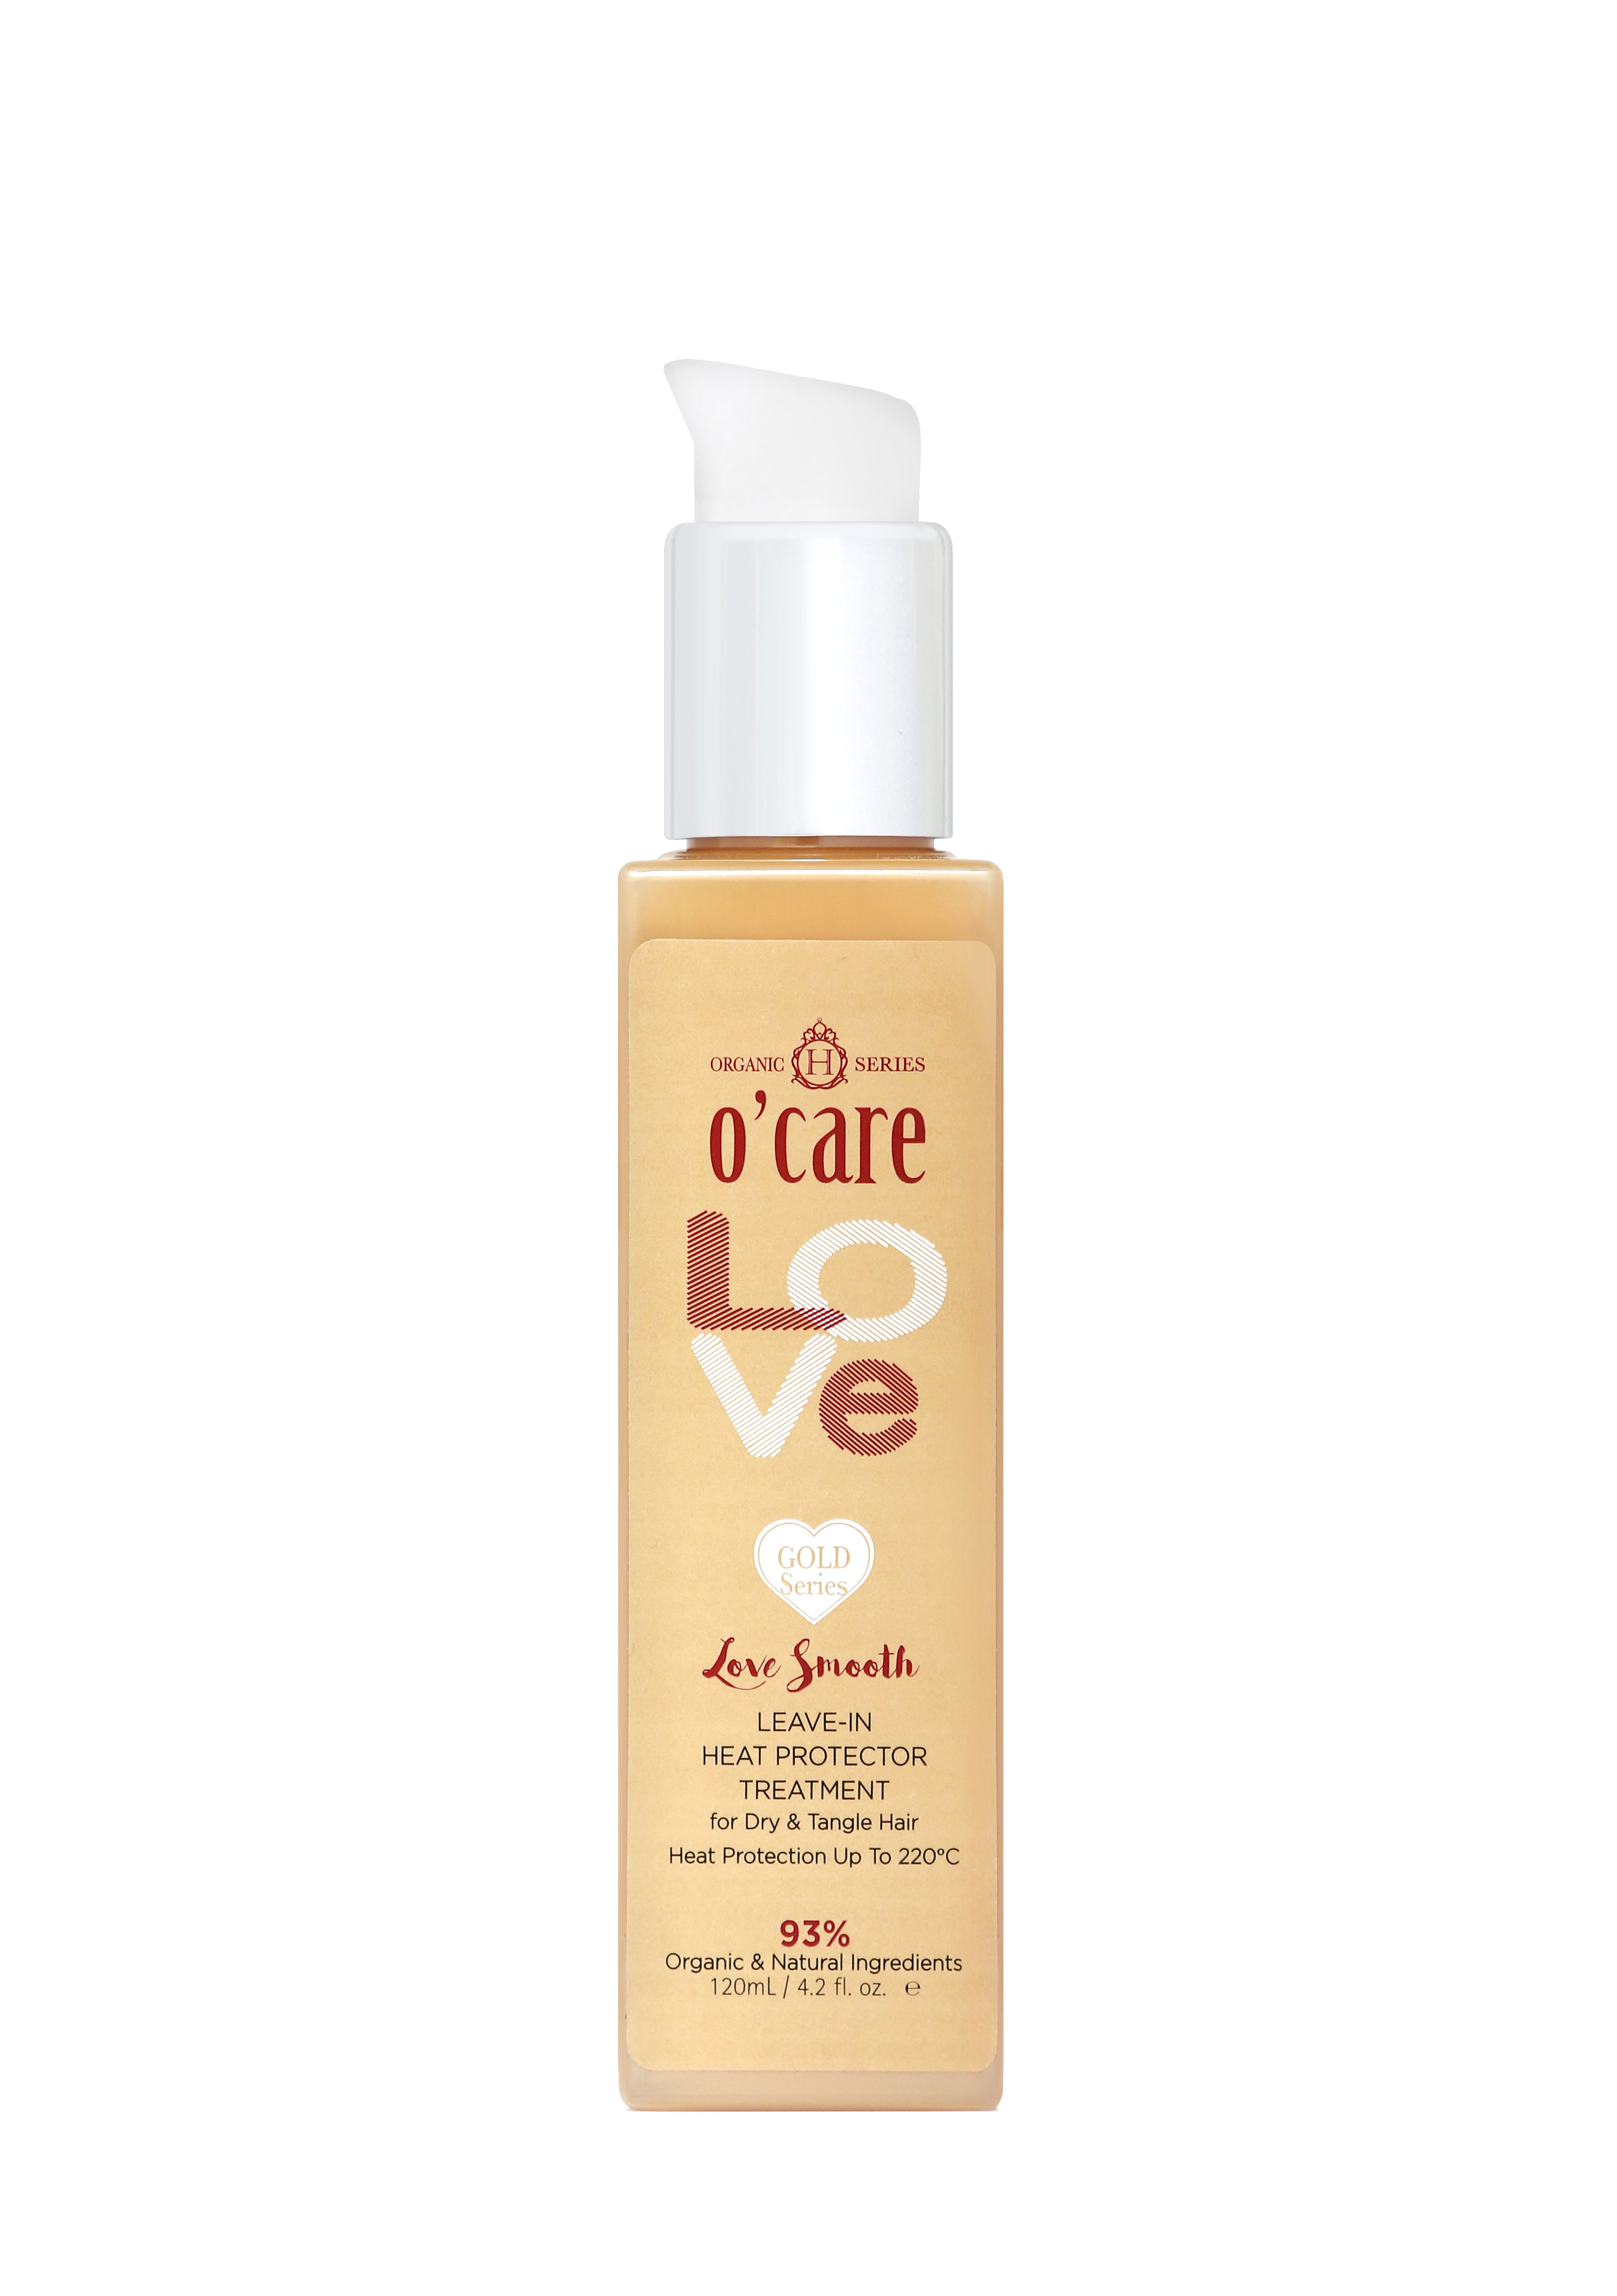 Love Smooth Leave-In Heat Protector Treatment 120ml